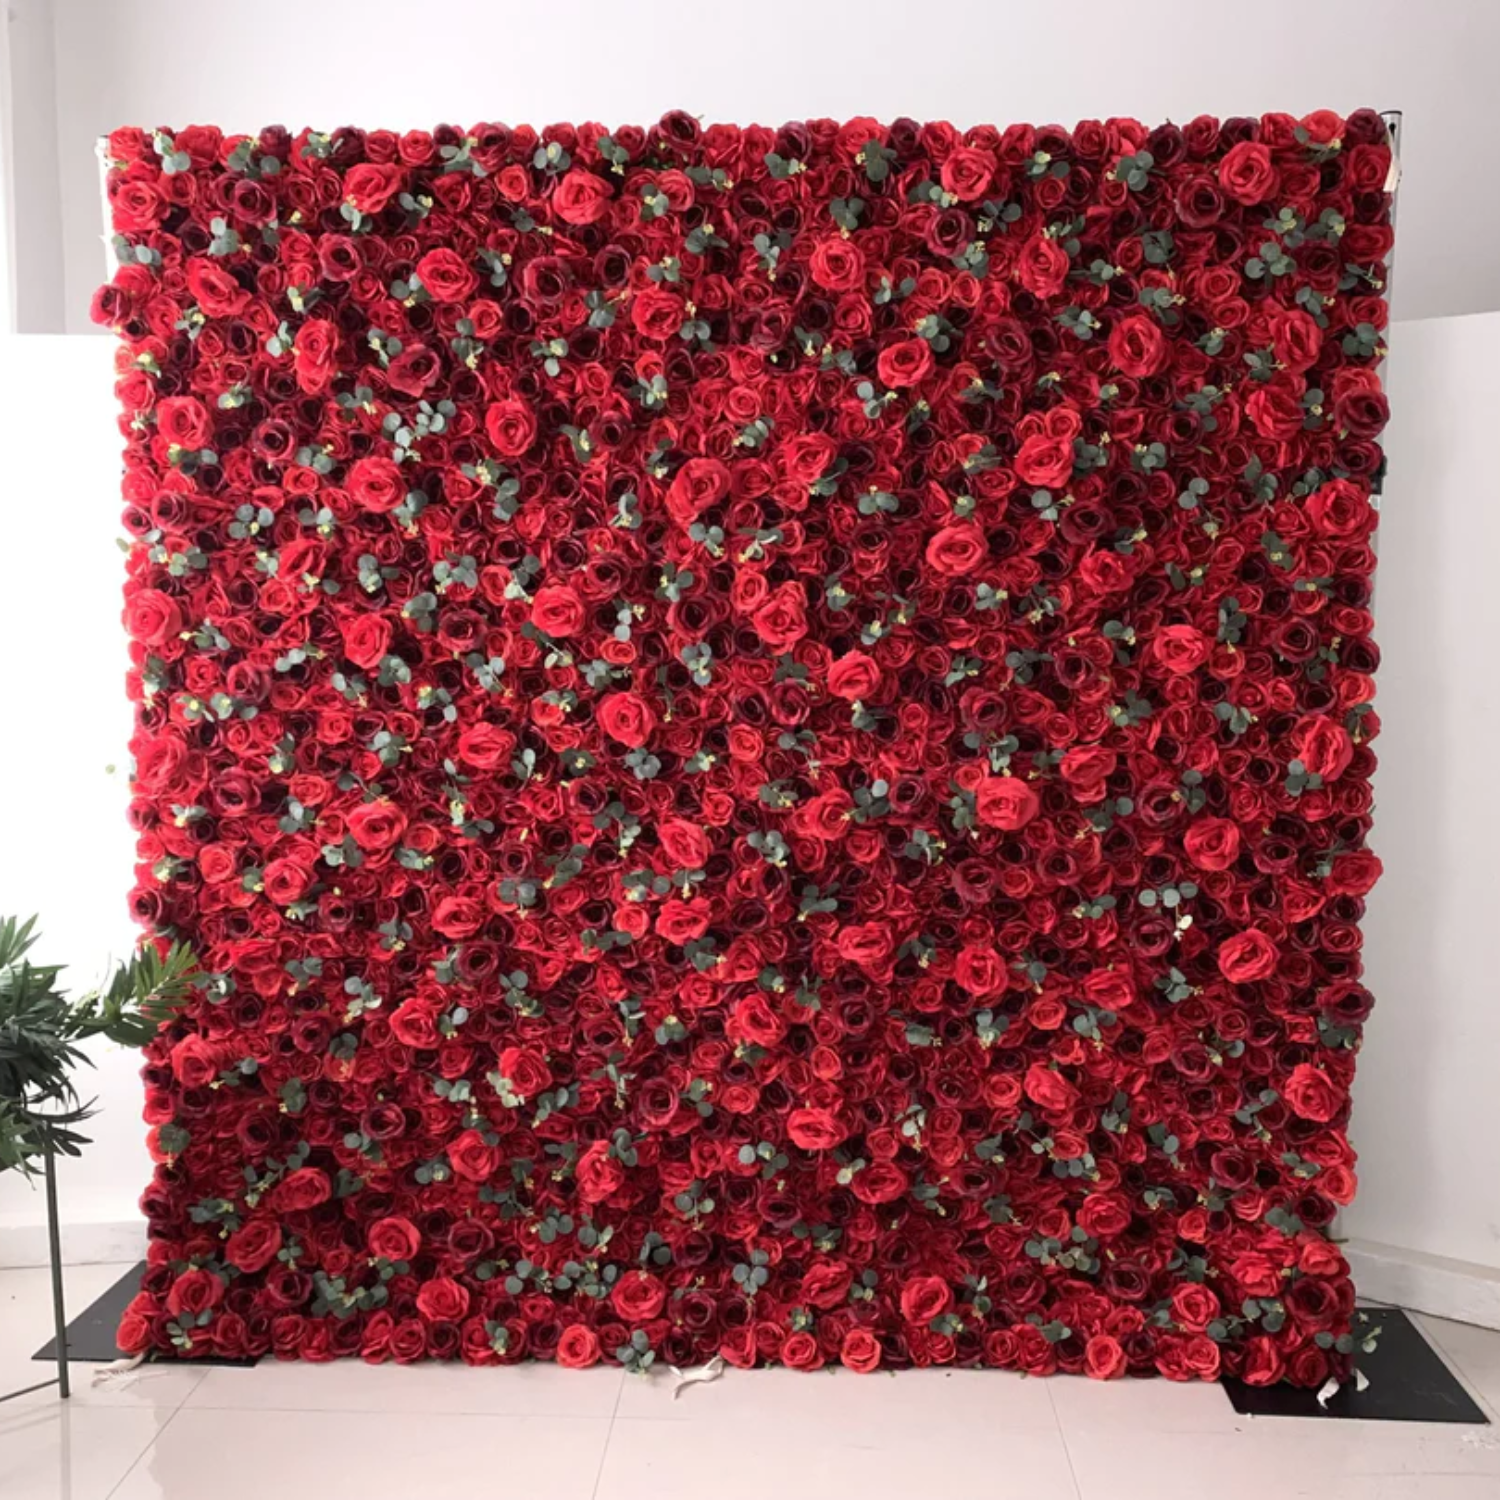 Red Rose Wall Rental - Riverside Flower Wall Rental - Perfect Capture Booth | Photo Booth Rental.png